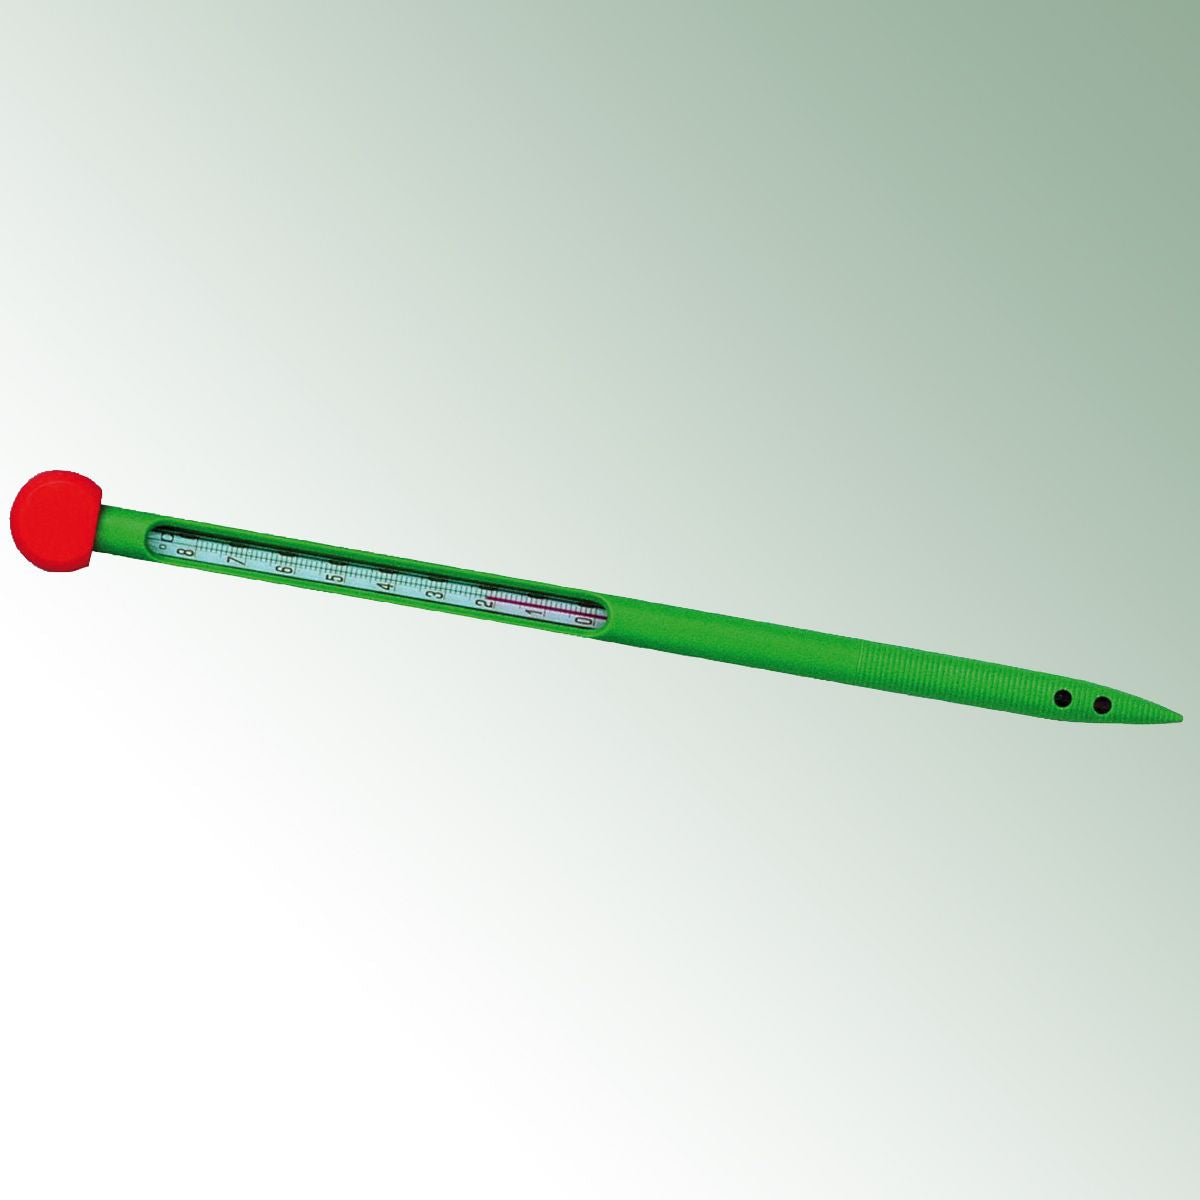 soil thermometer 80 made from plastic length 32,5 cm